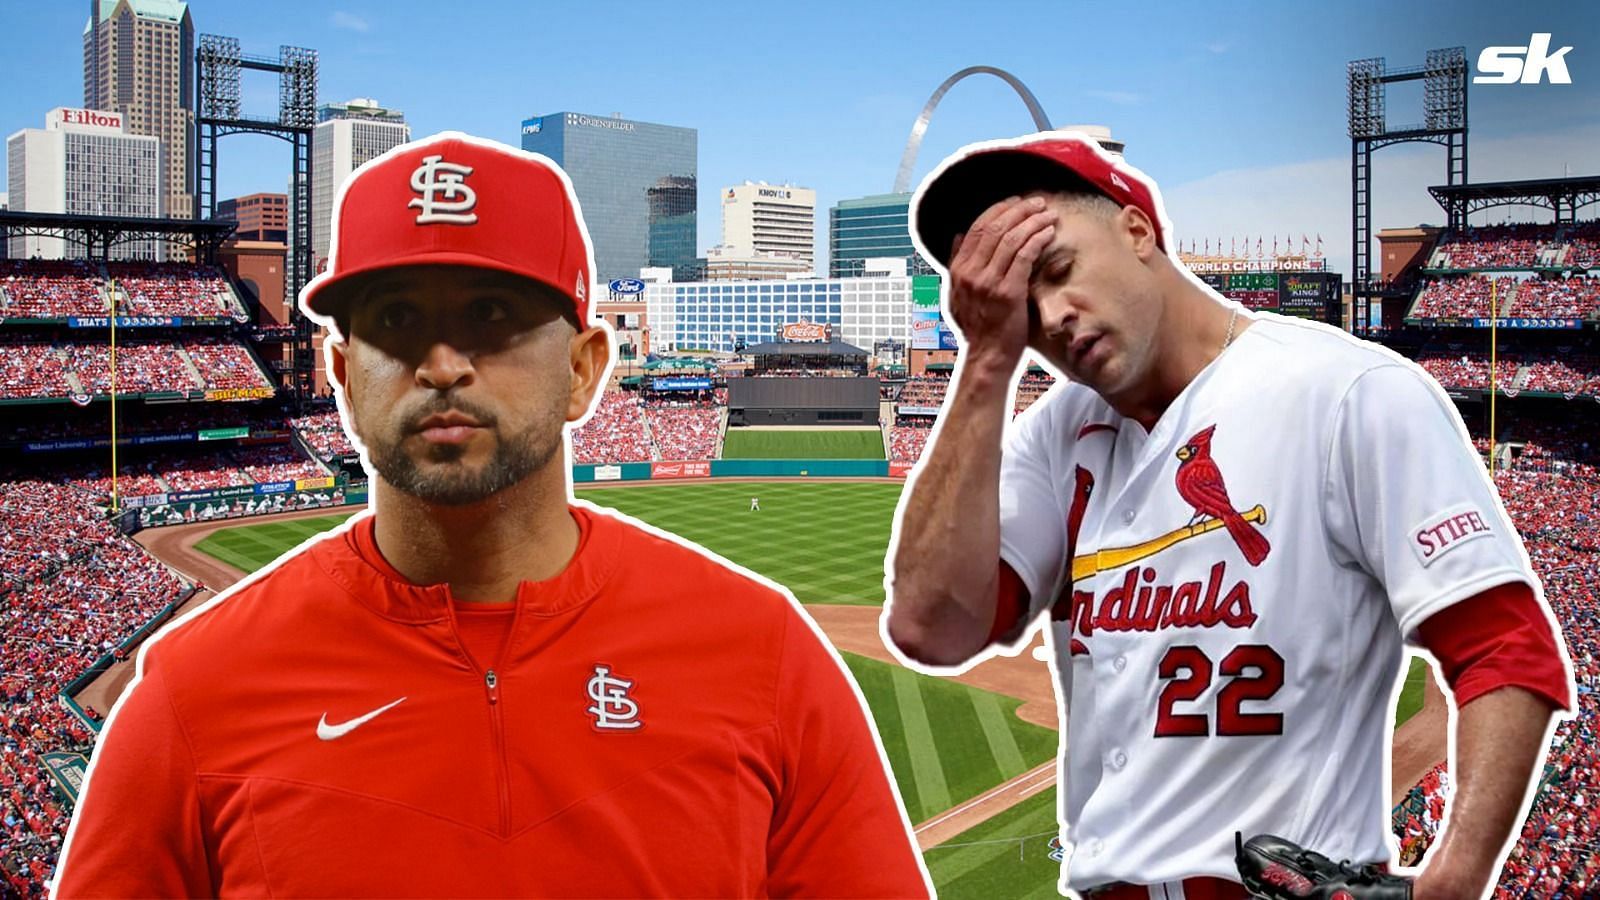 Jack Flaherty is honest about his experience on the trade block